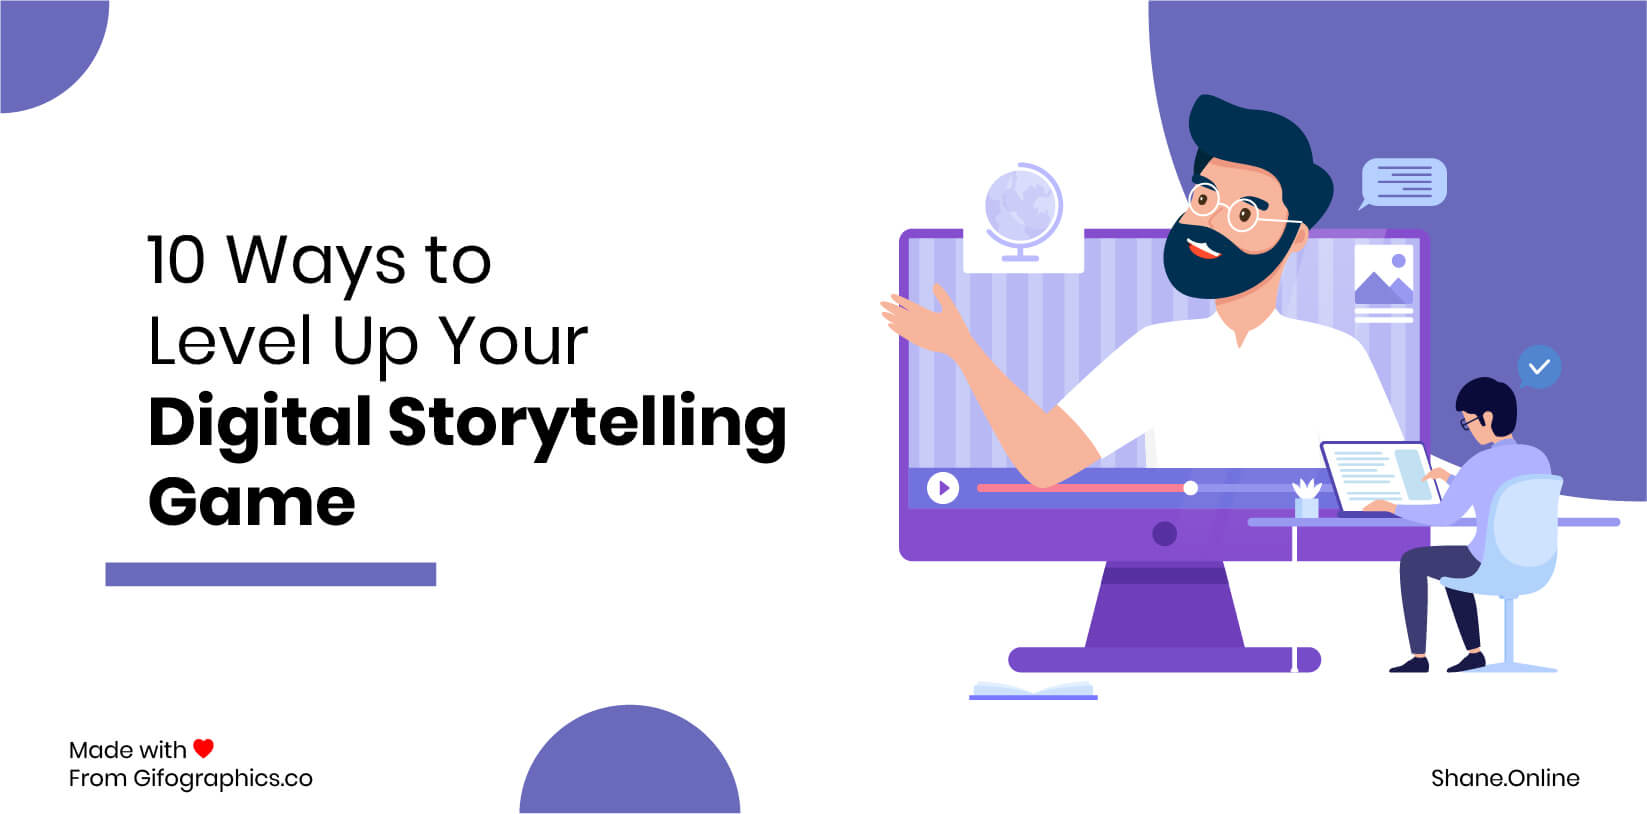 10 Ways to Level Up Your Digital Storytelling Game